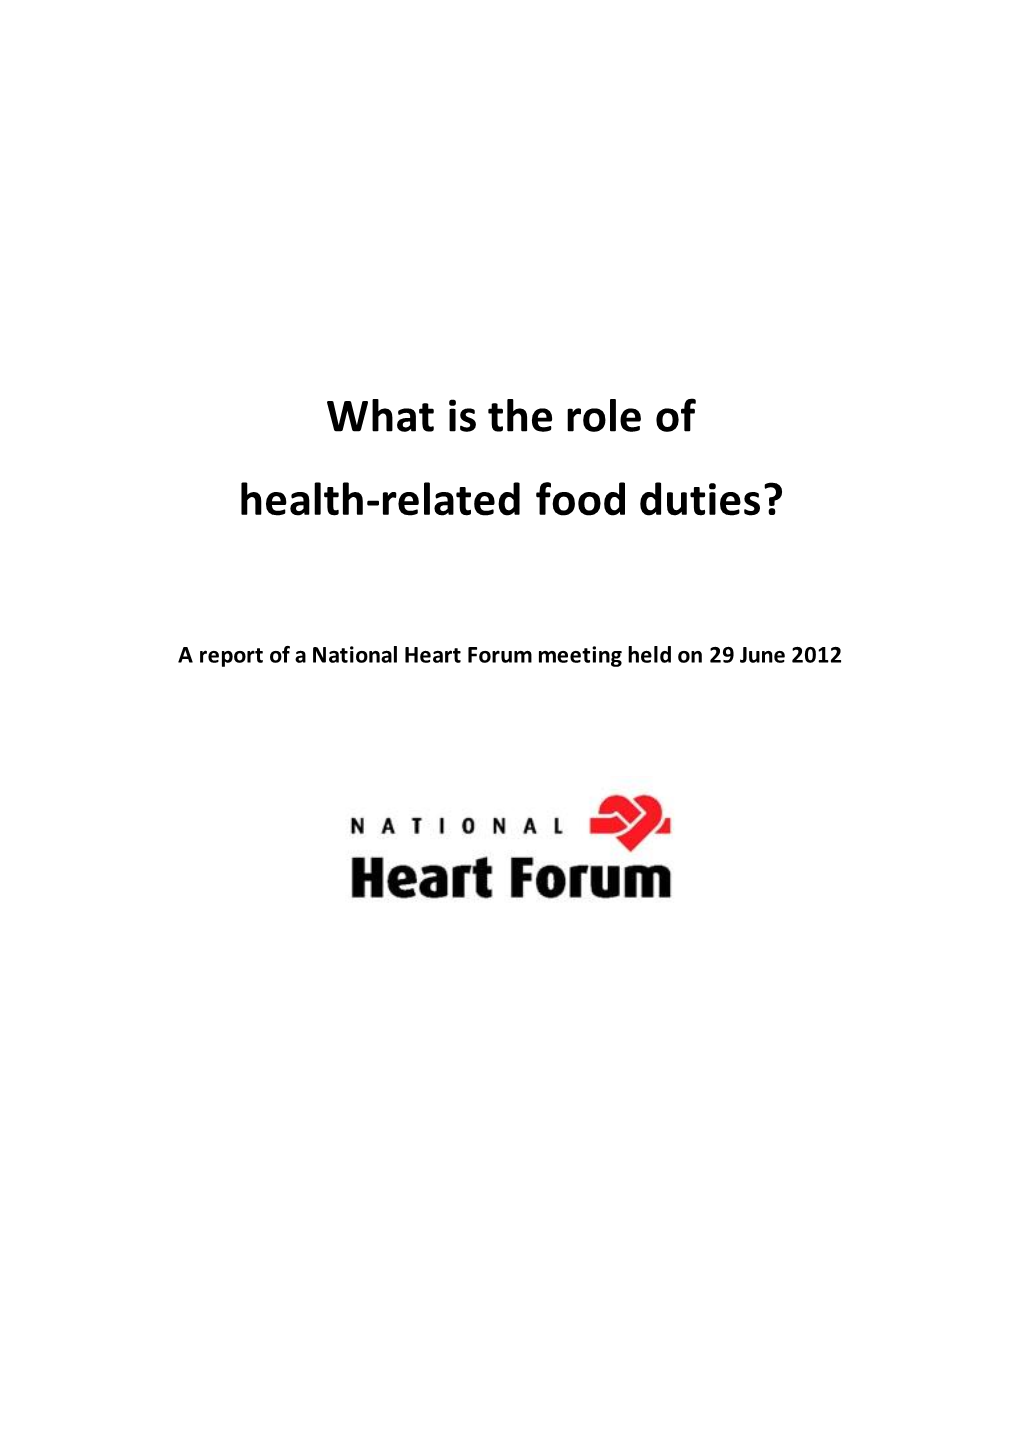 What Is the Role of Health-Related Food Duties?